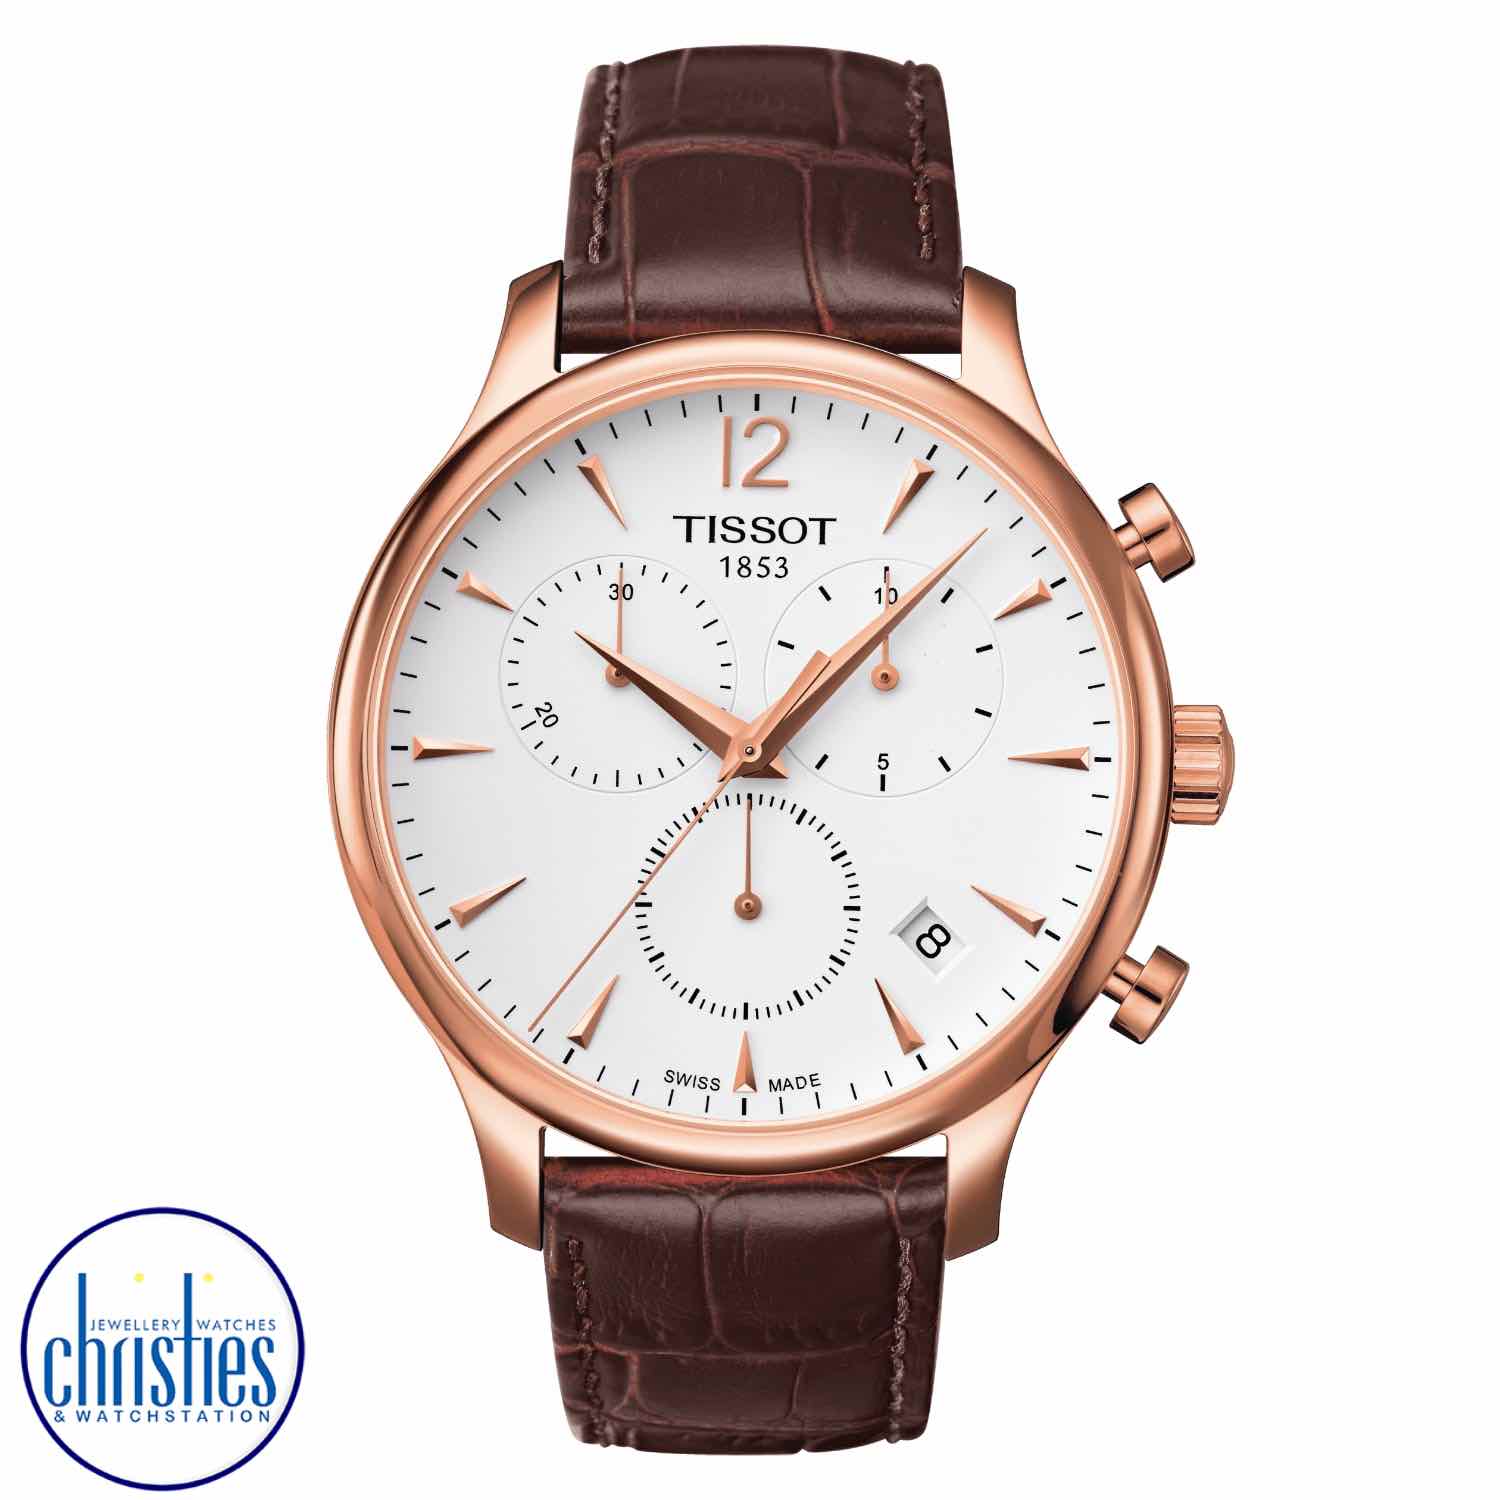 TISSOT Tradition Chronograph T0636173603700 tissot watches nz prices